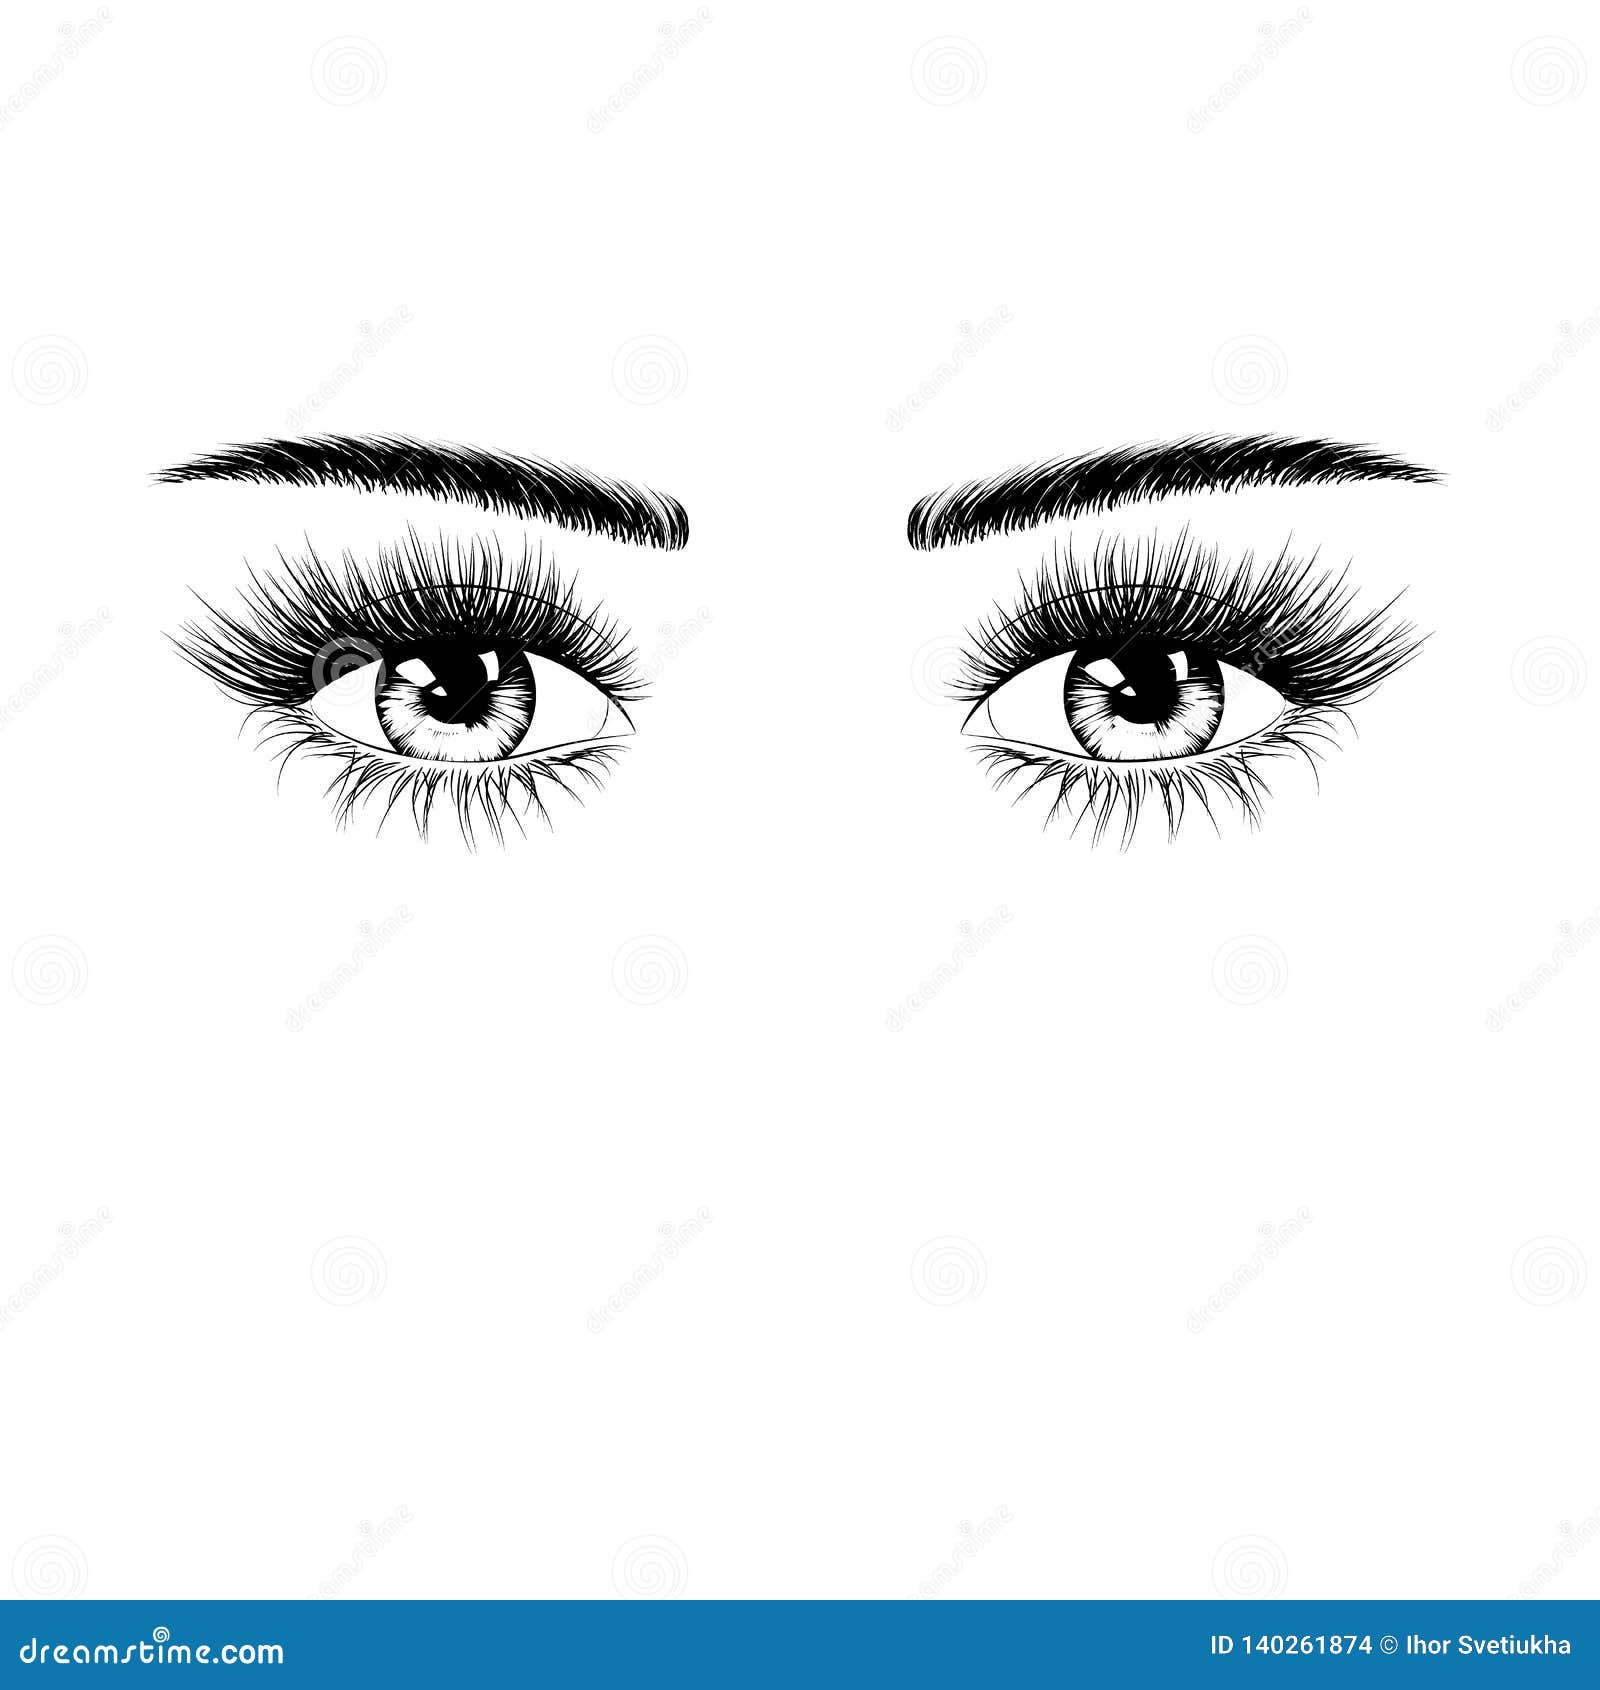 hand drawn female eyes silhouette with eyelashes and eyebrows.    on white background